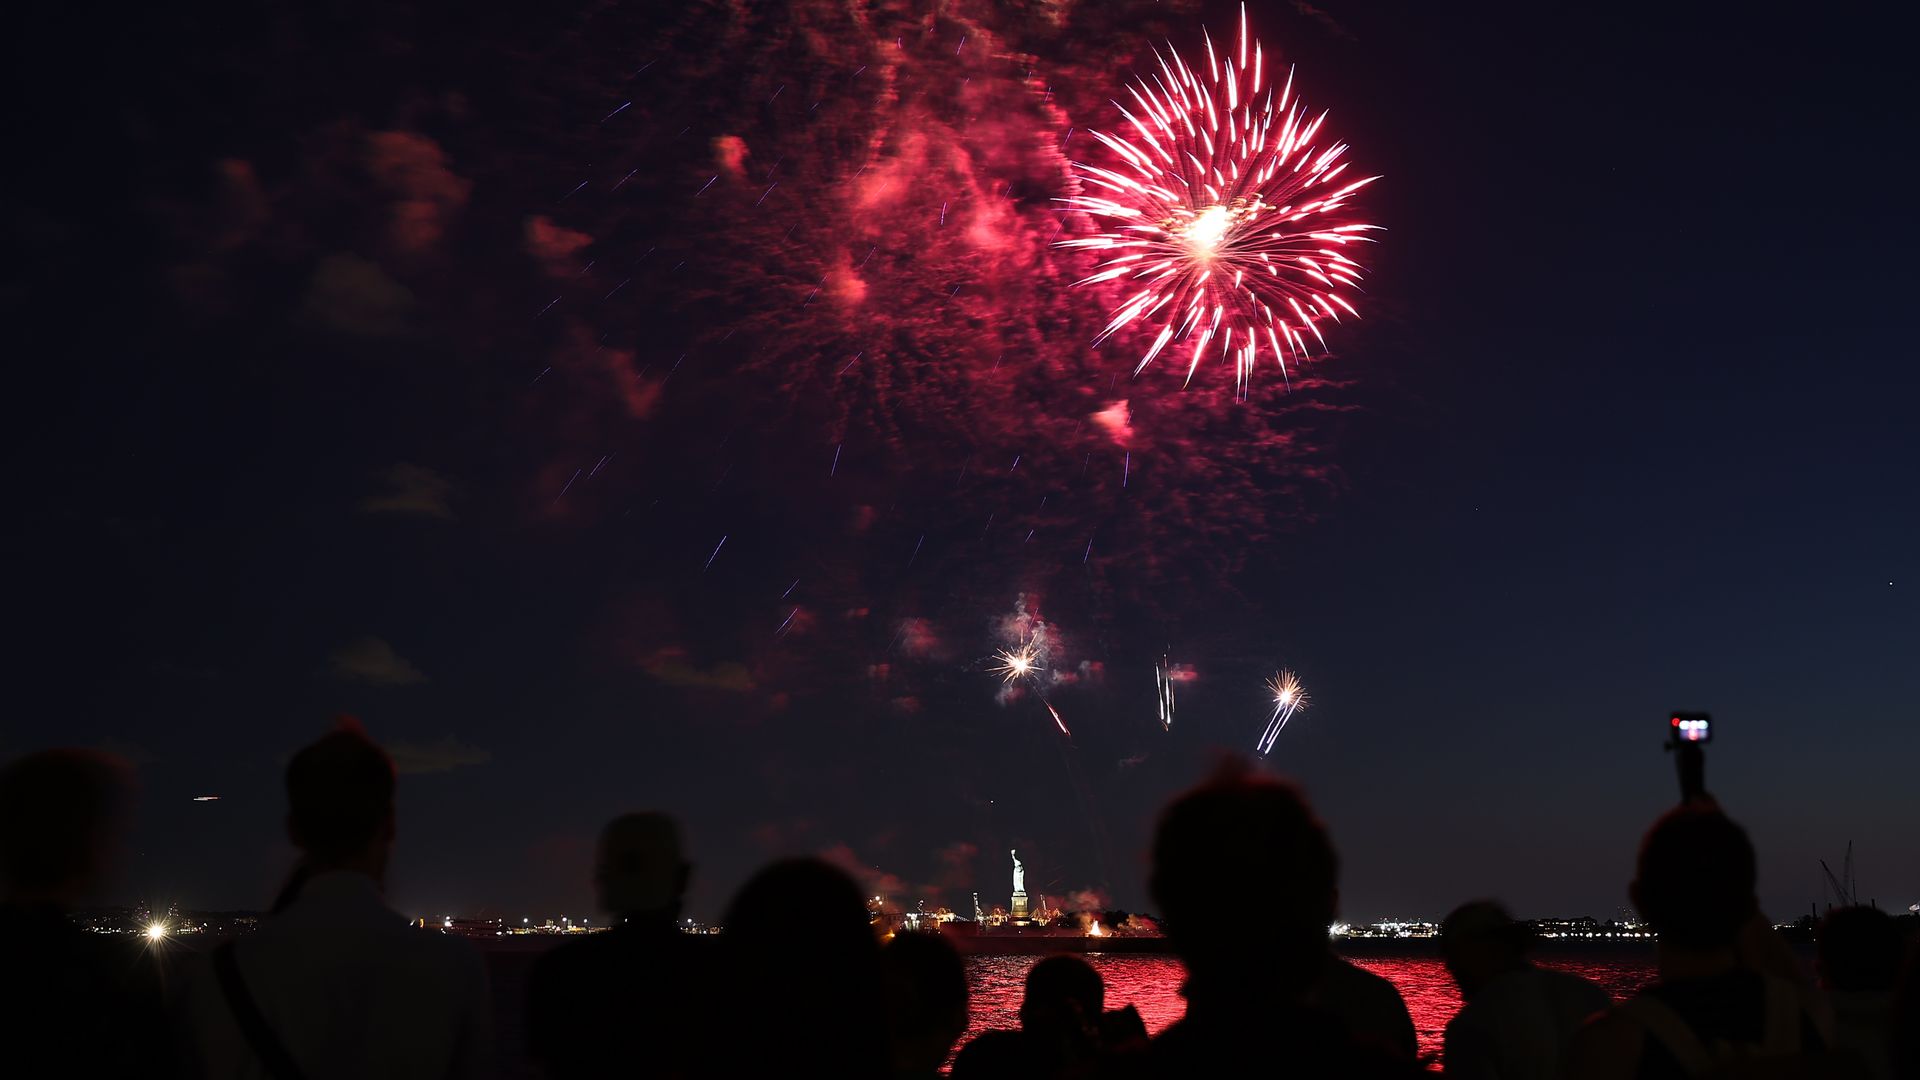 The fireworks to mark the end of the COVID-19 restrictions in New York State and honor frontline workers are seen with the Statue of Liberty in New York City, United States on June 15